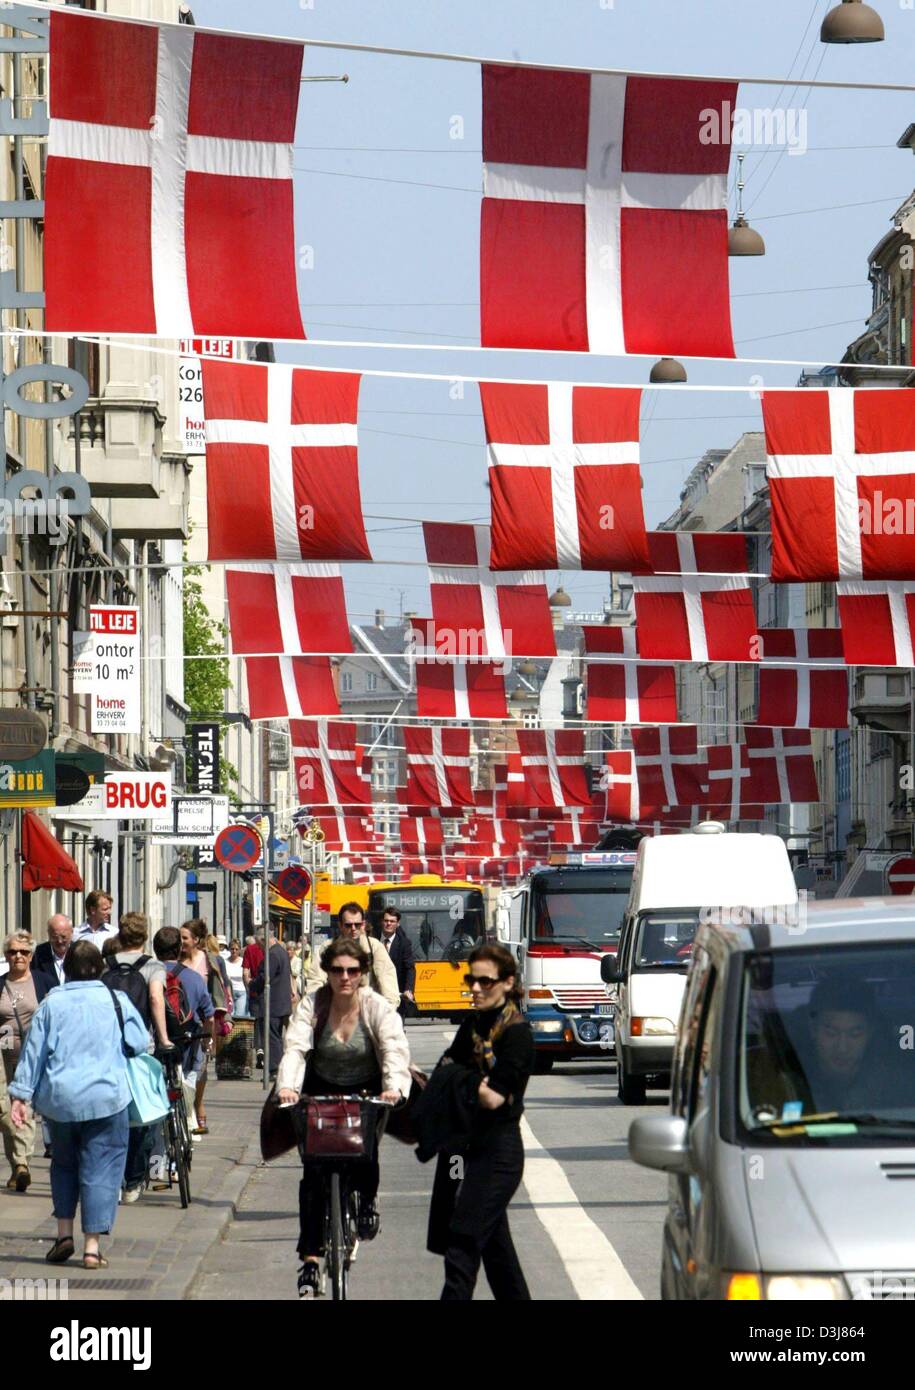 (dpa) - Danish national flags decorate a street in Copenhagen, Denmark, 11 May 2004. The preparations for the royal wedding of crown prince Frederik of Denmark and Mary Donaldson, on Friday, 14 May 2004,  are underway. Stock Photo